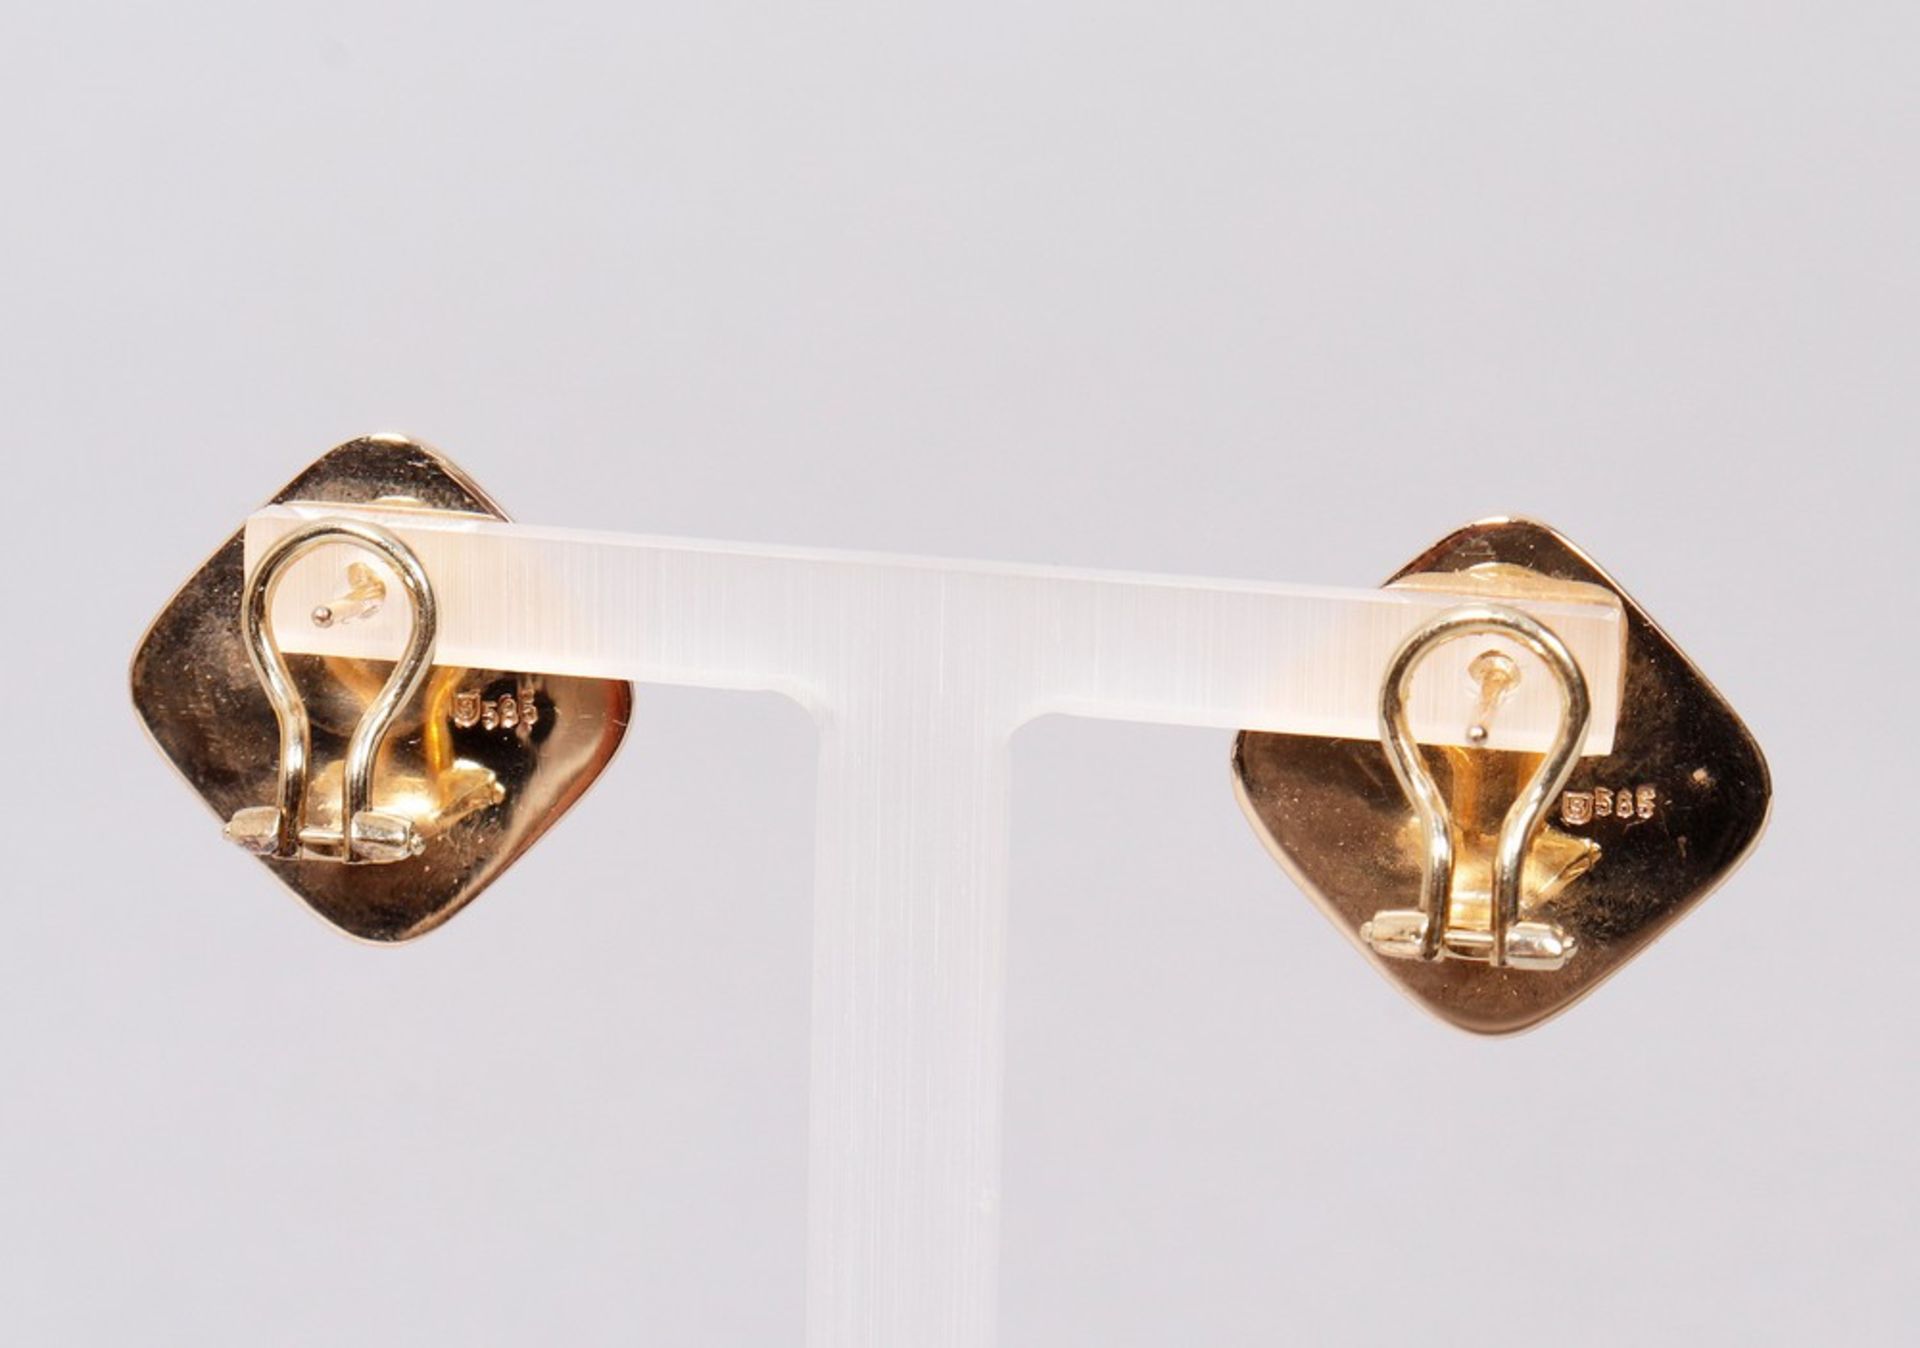 Pair of clip-on earrings, 585 gold - Image 2 of 4